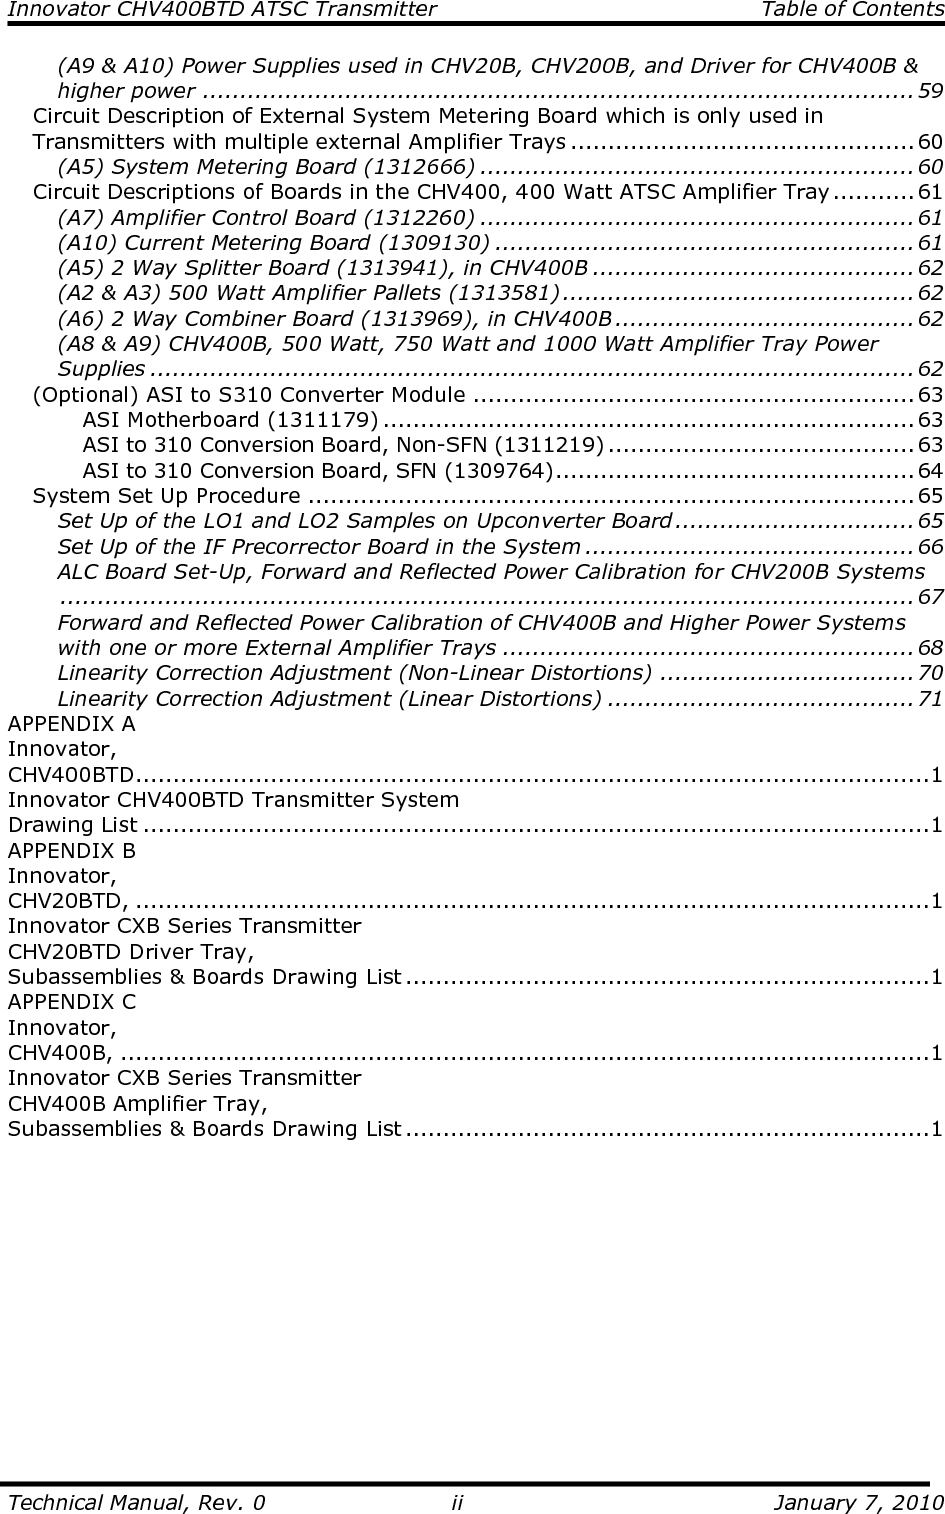 Innovator CHV400BTD ATSC Transmitter  Table of Contents  Technical Manual, Rev. 0  ii  January 7, 2010 (A9 &amp; A10) Power Supplies used in CHV20B, CHV200B, and Driver for CHV400B &amp; higher power ...............................................................................................59 Circuit Description of External System Metering Board which is only used in Transmitters with multiple external Amplifier Trays ..............................................60 (A5) System Metering Board (1312666) ..........................................................60 Circuit Descriptions of Boards in the CHV400, 400 Watt ATSC Amplifier Tray ........... 61 (A7) Amplifier Control Board (1312260) ..........................................................61 (A10) Current Metering Board (1309130) ........................................................61 (A5) 2 Way Splitter Board (1313941), in CHV400B ...........................................62 (A2 &amp; A3) 500 Watt Amplifier Pallets (1313581) ...............................................62 (A6) 2 Way Combiner Board (1313969), in CHV400B ........................................62 (A8 &amp; A9) CHV400B, 500 Watt, 750 Watt and 1000 Watt Amplifier Tray Power Supplies ......................................................................................................62 (Optional) ASI to S310 Converter Module ...........................................................63 ASI Motherboard (1311179) .......................................................................63 ASI to 310 Conversion Board, Non-SFN (1311219) .........................................63 ASI to 310 Conversion Board, SFN (1309764)................................................64 System Set Up Procedure .................................................................................65 Set Up of the LO1 and LO2 Samples on Upconverter Board ................................65 Set Up of the IF Precorrector Board in the System ............................................66 ALC Board Set-Up, Forward and Reflected Power Calibration for CHV200B Systems..................................................................................................................67 Forward and Reflected Power Calibration of CHV400B and Higher Power Systems with one or more External Amplifier Trays .......................................................68 Linearity Correction Adjustment (Non-Linear Distortions) ..................................70 Linearity Correction Adjustment (Linear Distortions) .........................................71 APPENDIX A                                                                                                        Innovator,                                                                                                     CHV400BTD..........................................................................................................1 Innovator CHV400BTD Transmitter System                                                              Drawing List .........................................................................................................1 APPENDIX B                                                                                                                   Innovator,                                                                                                      CHV20BTD, ..........................................................................................................1 Innovator CXB Series Transmitter                                                                            CHV20BTD Driver Tray,                                                                                                       Subassemblies &amp; Boards Drawing List ......................................................................1 APPENDIX C                                                                                                       Innovator,                                                                                                             CHV400B, ............................................................................................................1 Innovator CXB Series Transmitter                                                                               CHV400B Amplifier Tray,                                                                                      Subassemblies &amp; Boards Drawing List ......................................................................1 